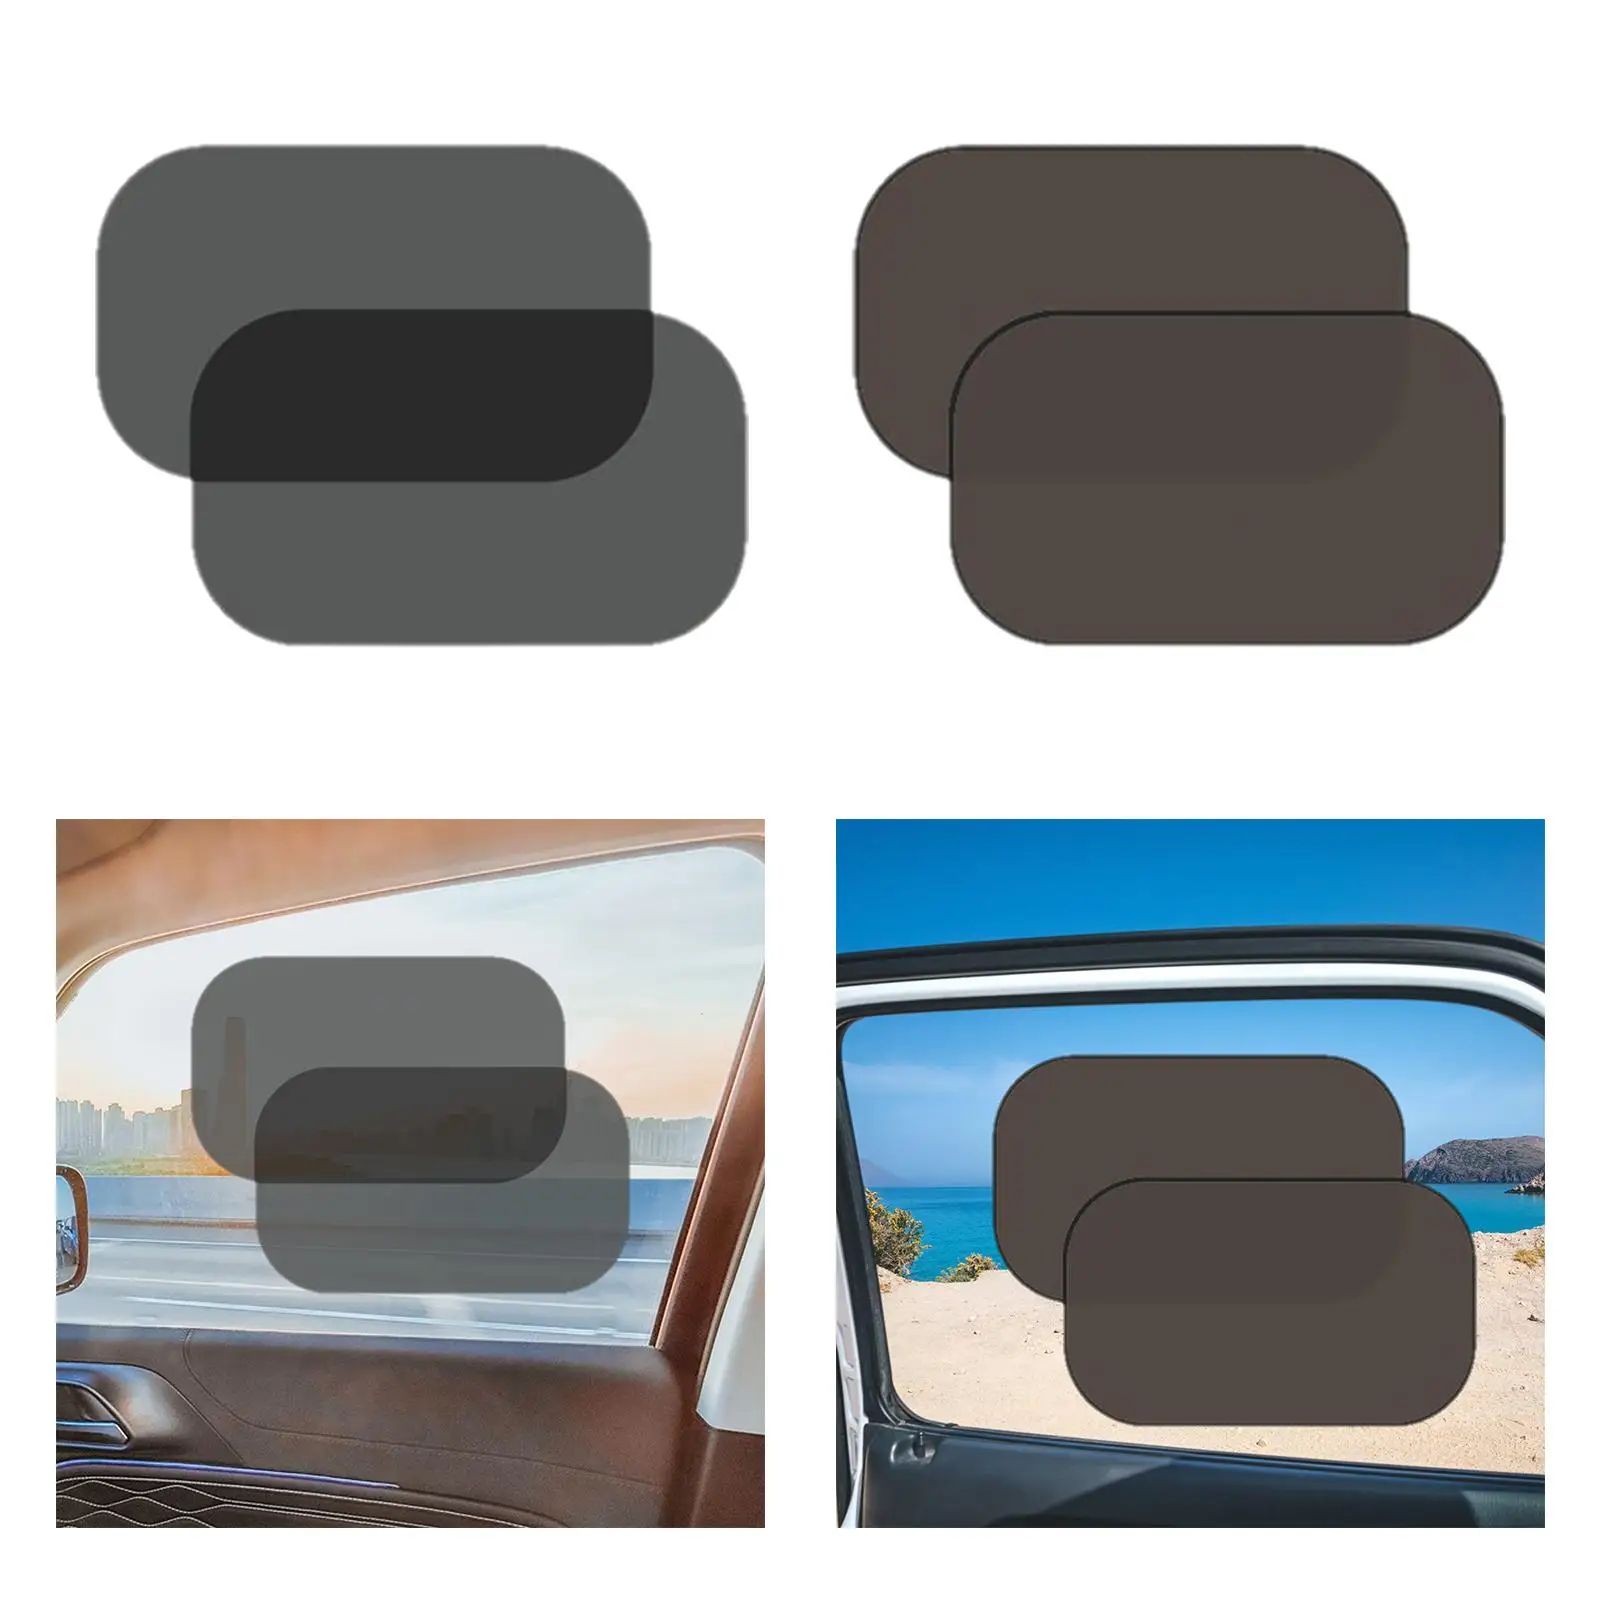 2x Car Side Window Sunshades Interior Heat Shields Static Cling Sun Visor for Most Cars Easy Installation Car Accessories